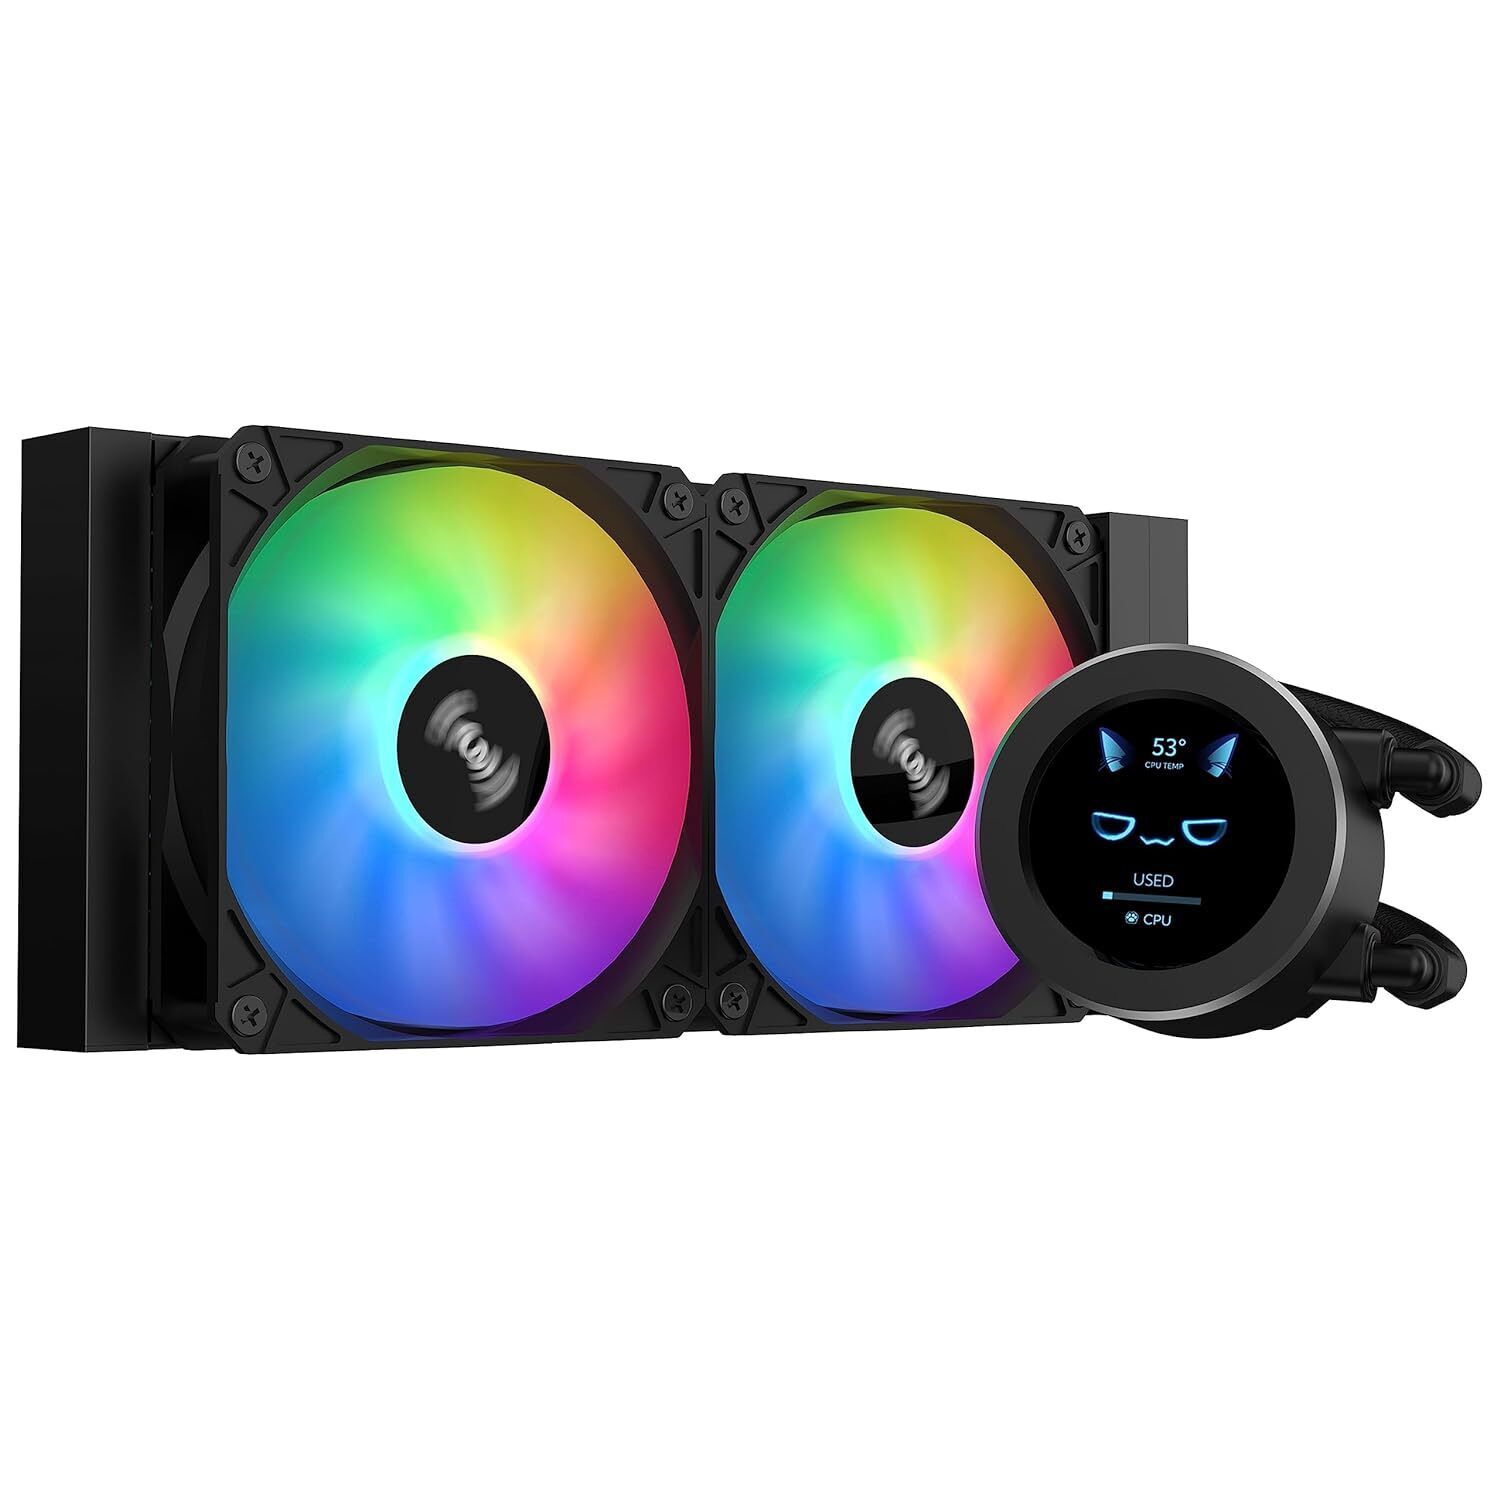 SAMA 240mm ARGB CPU Liquid Cooler With Video Player and LCD Screen Display